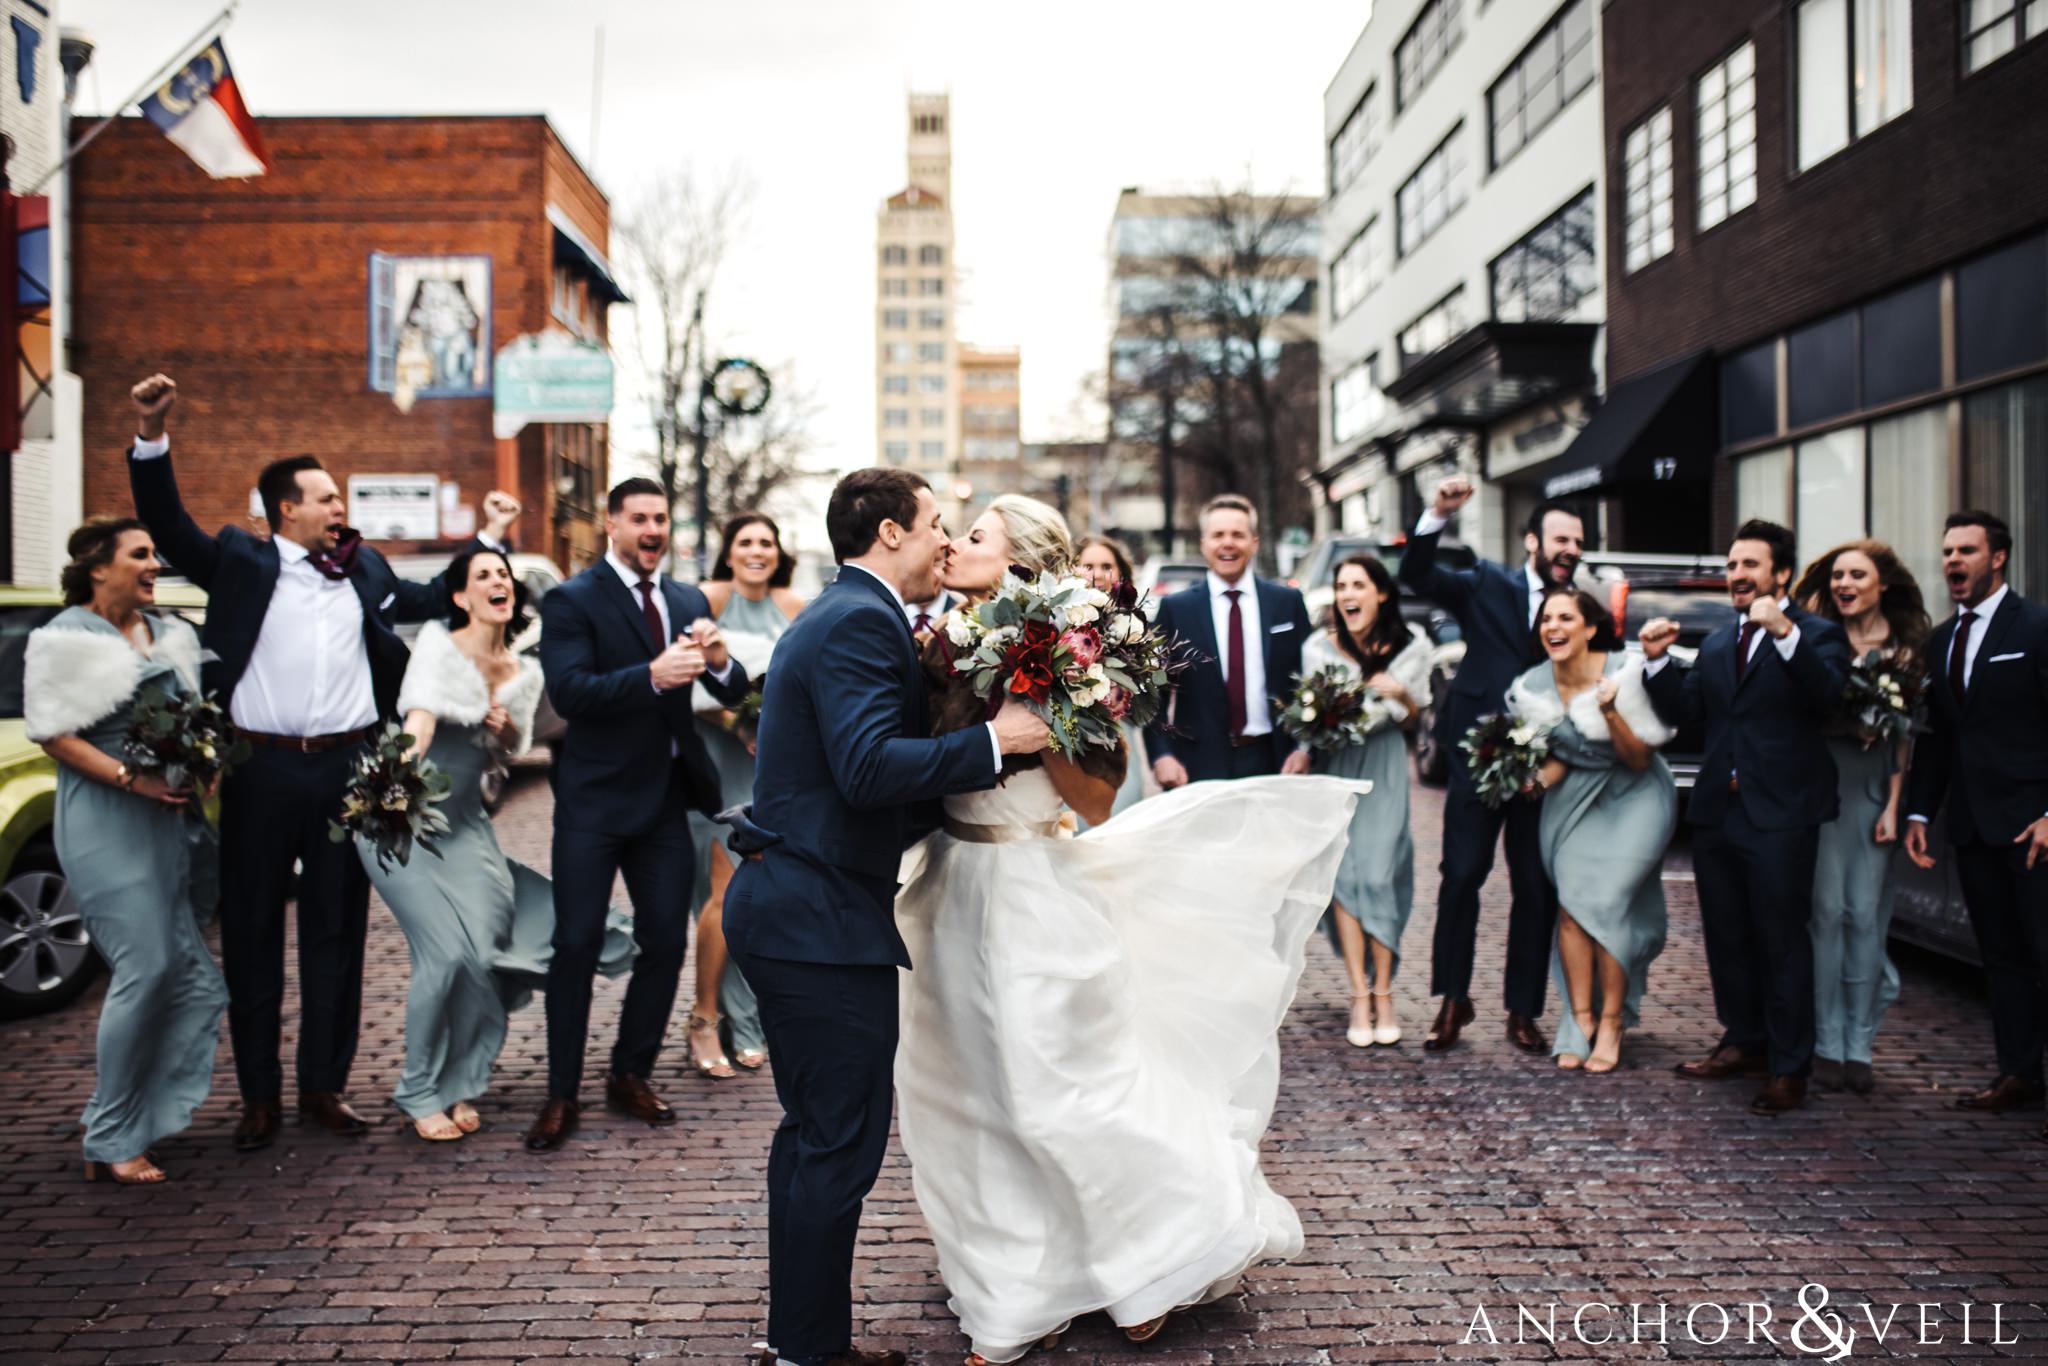 cobble stone streets during their Downtown Asheville Wedding